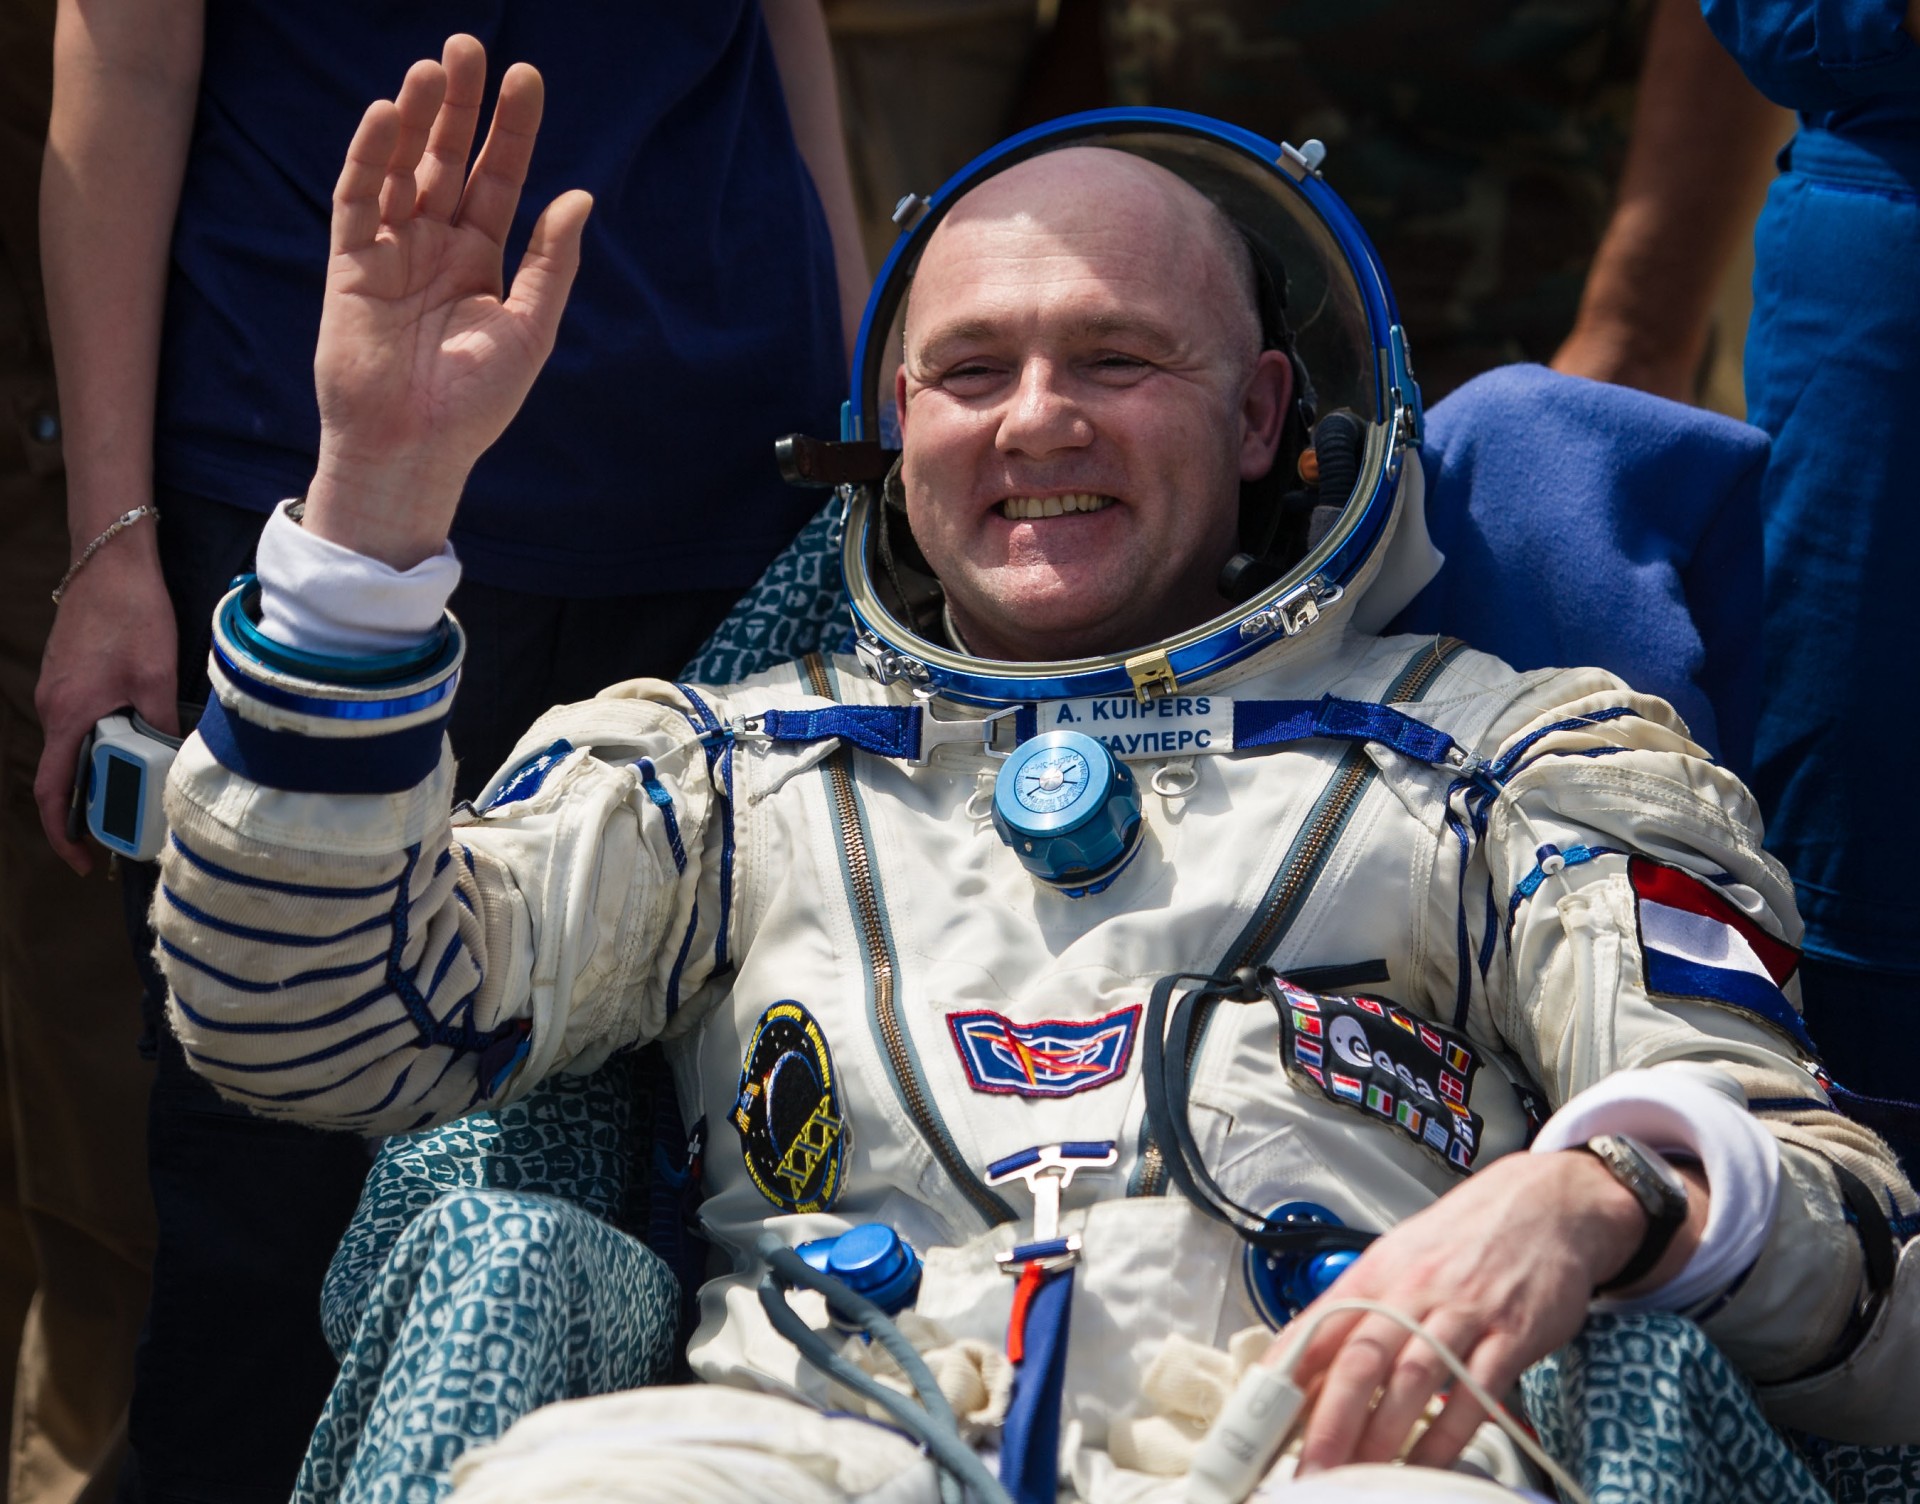 Dutch astronaut André Kuipers is one of Spacebuzz' most prominent ambassador NASA/BILL INGALLS